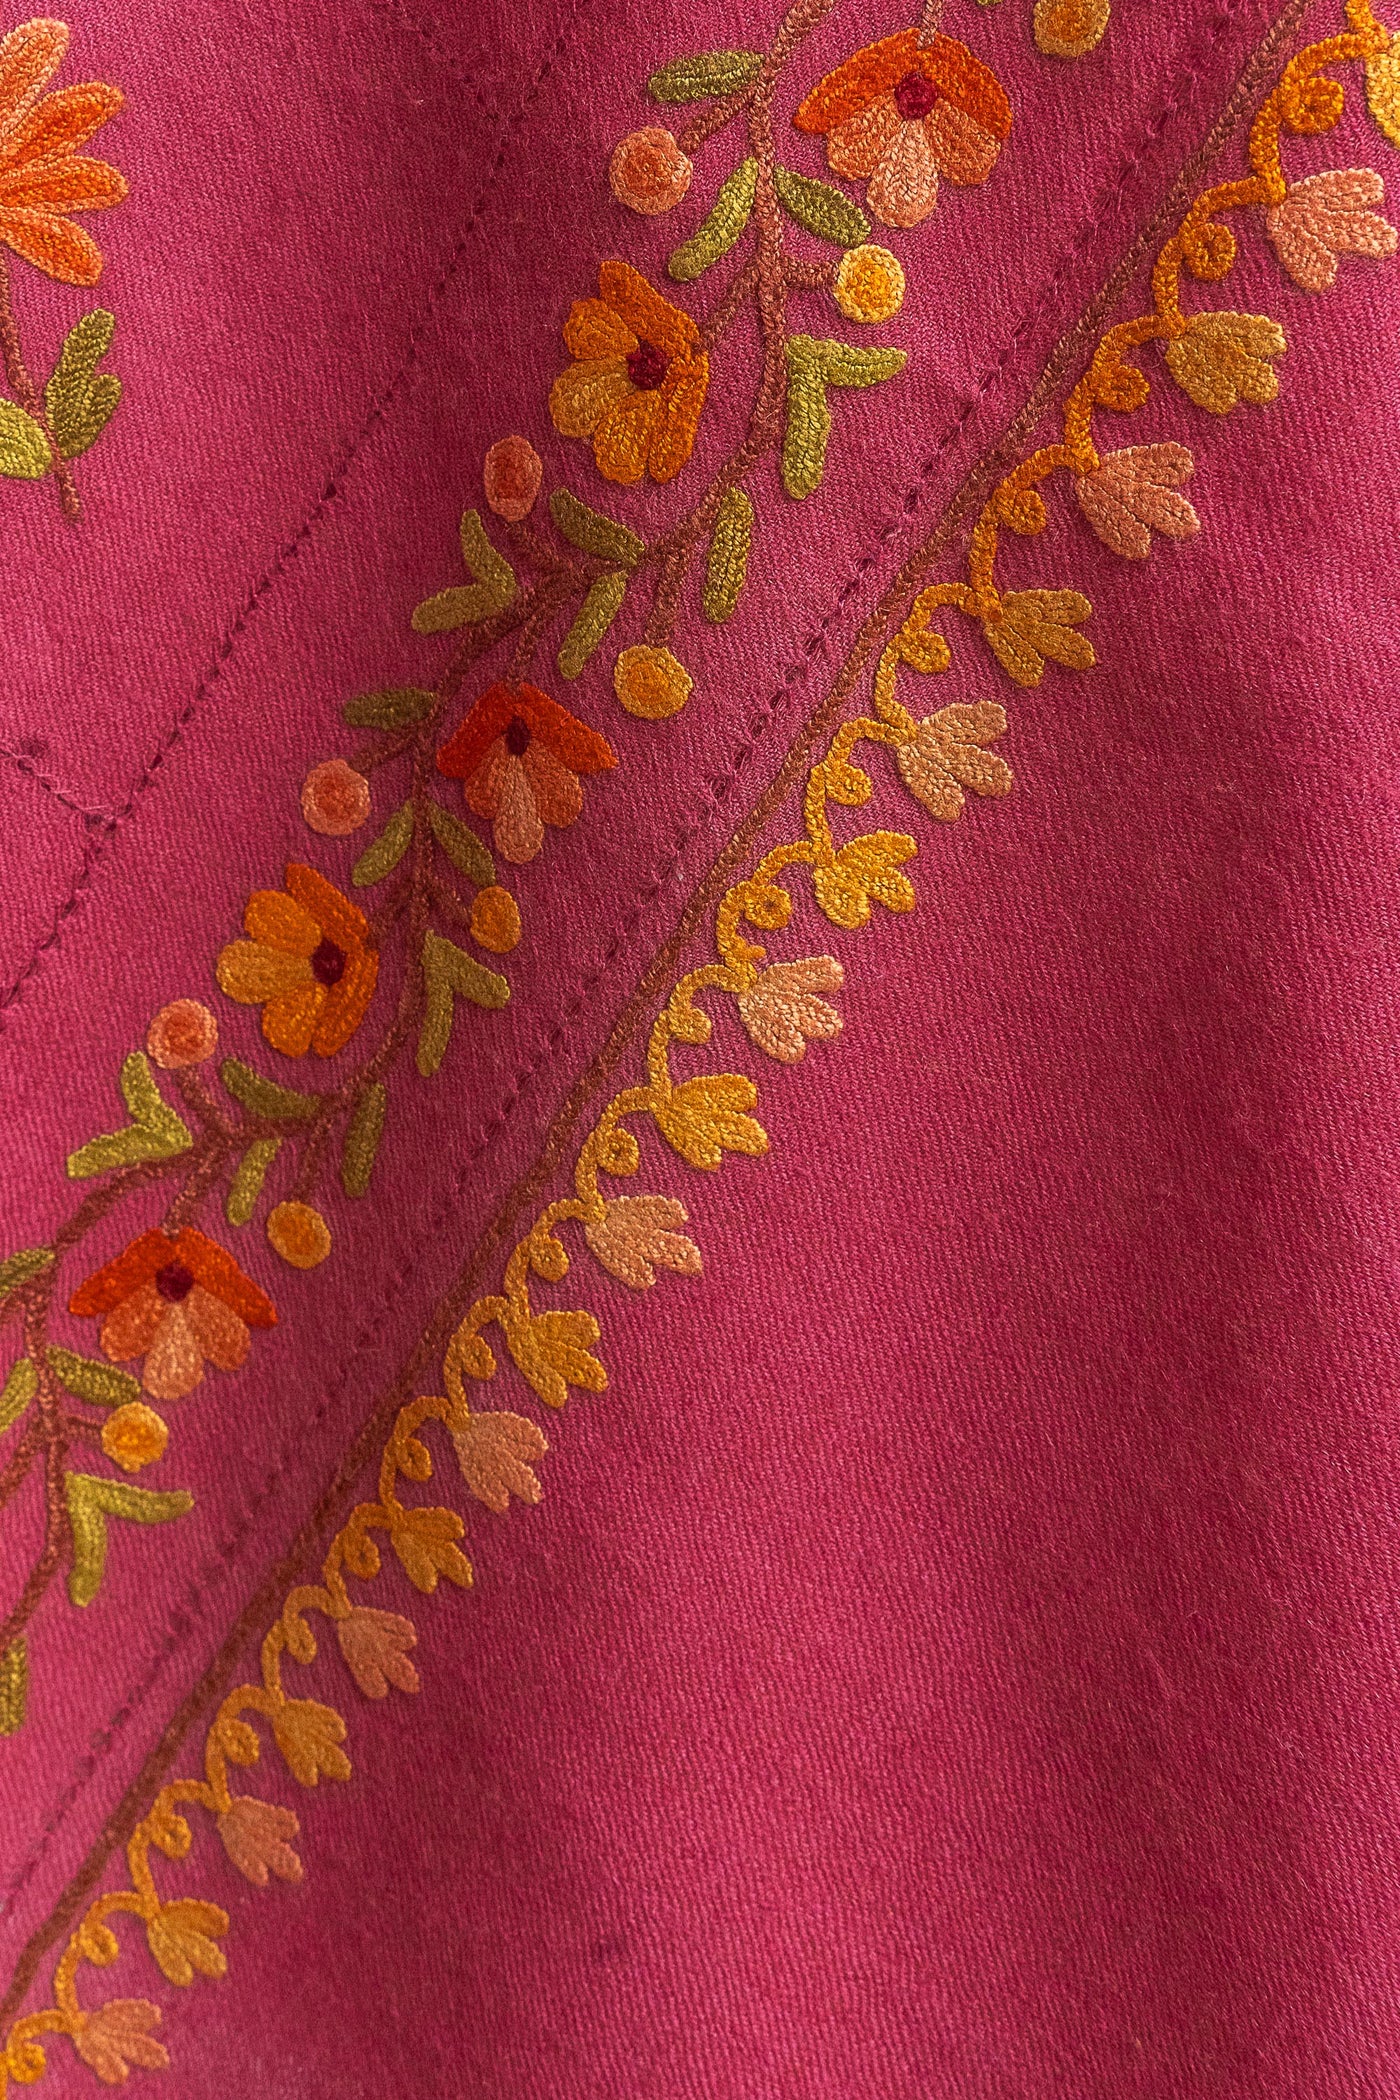 Pink Merino Wool Shawl with Intricate Hand Aari Floral Embroidery